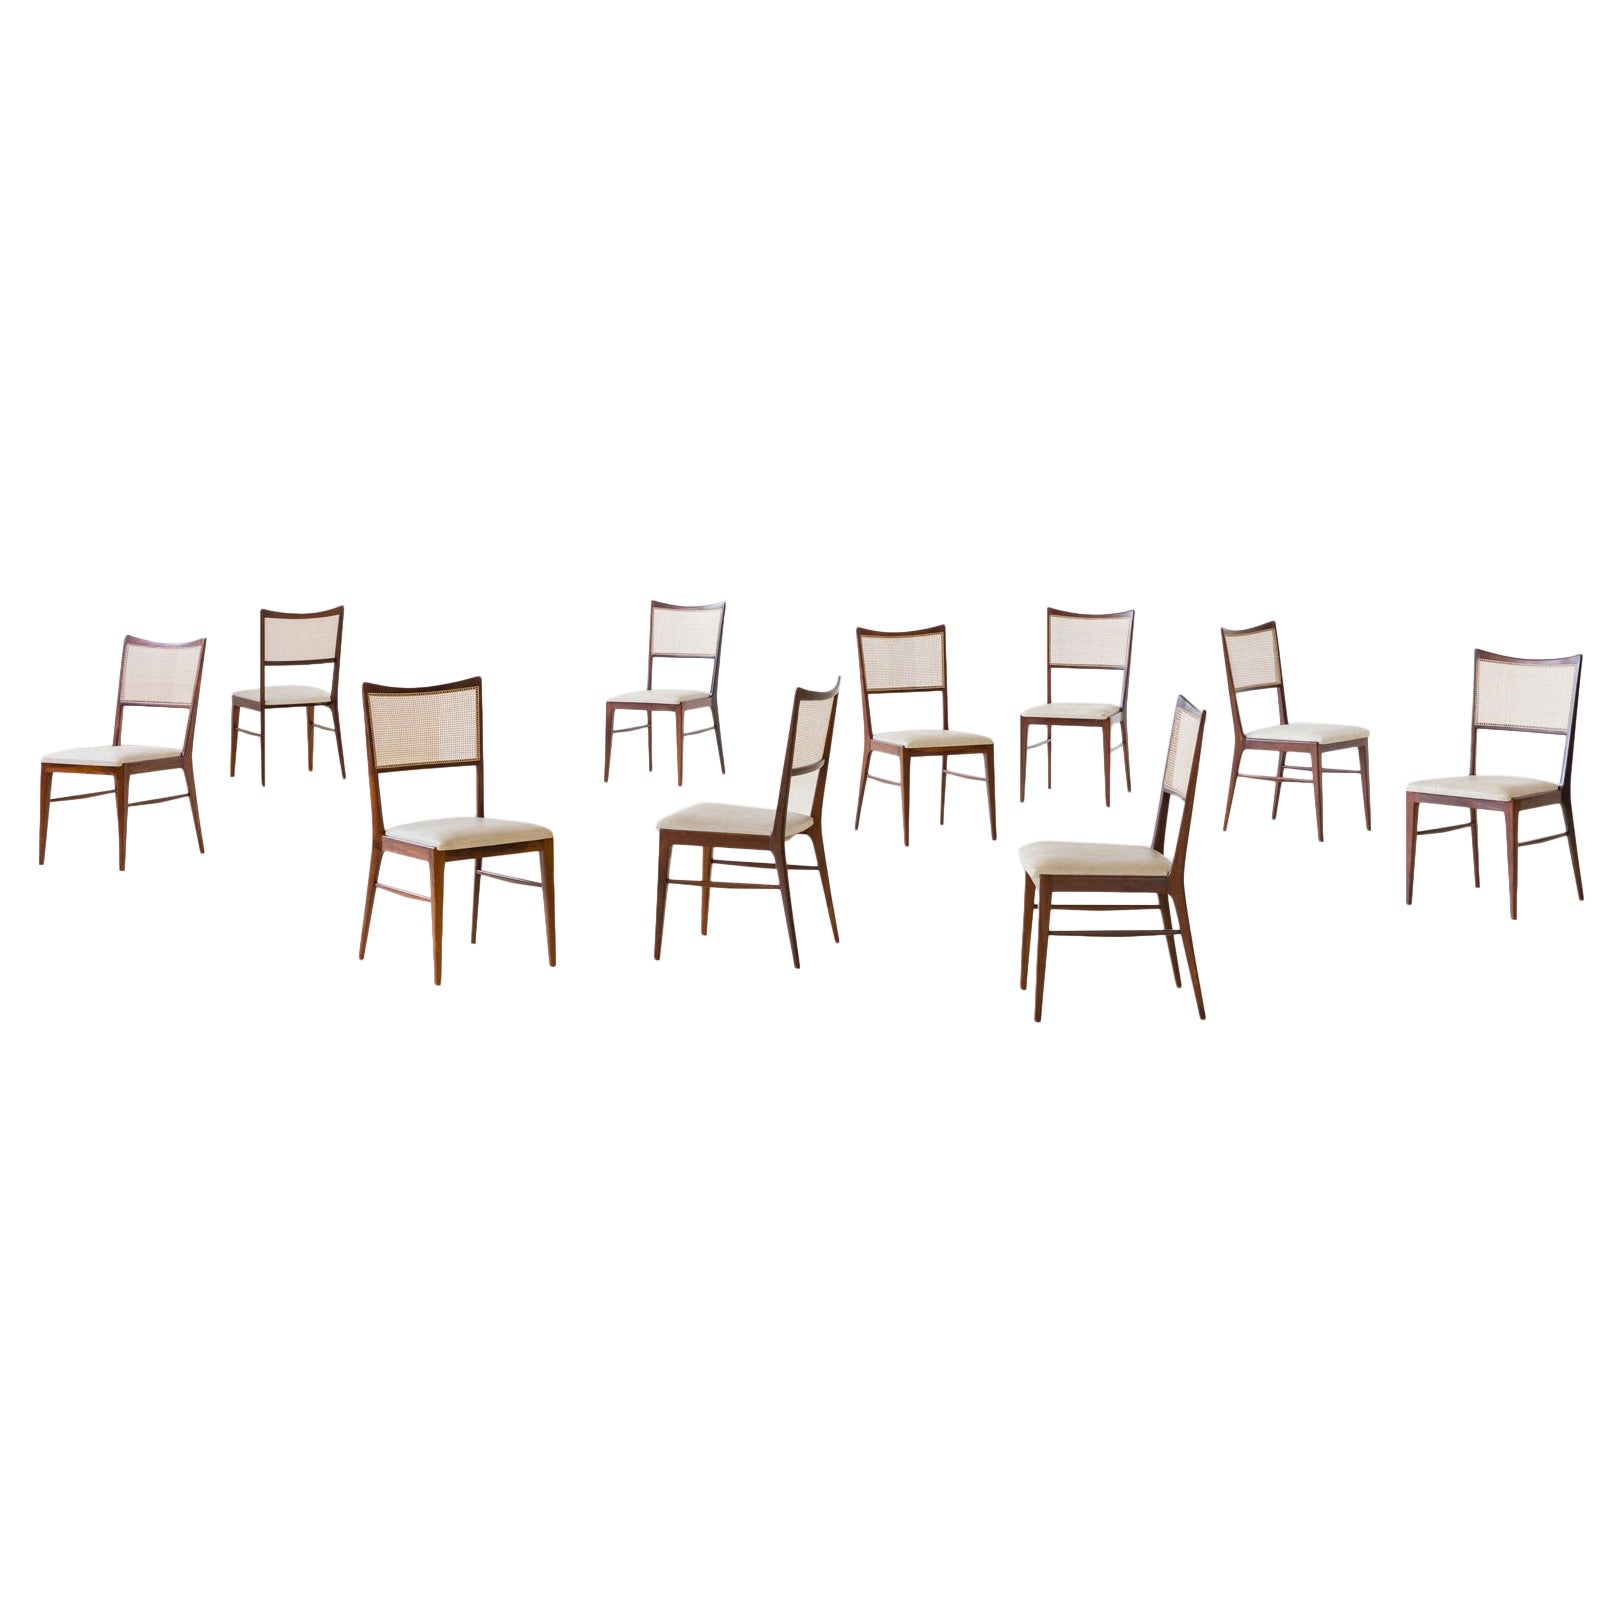 Set of 10 Rosewood and Cane Dining Chairs, Unknown Designer, 1950s